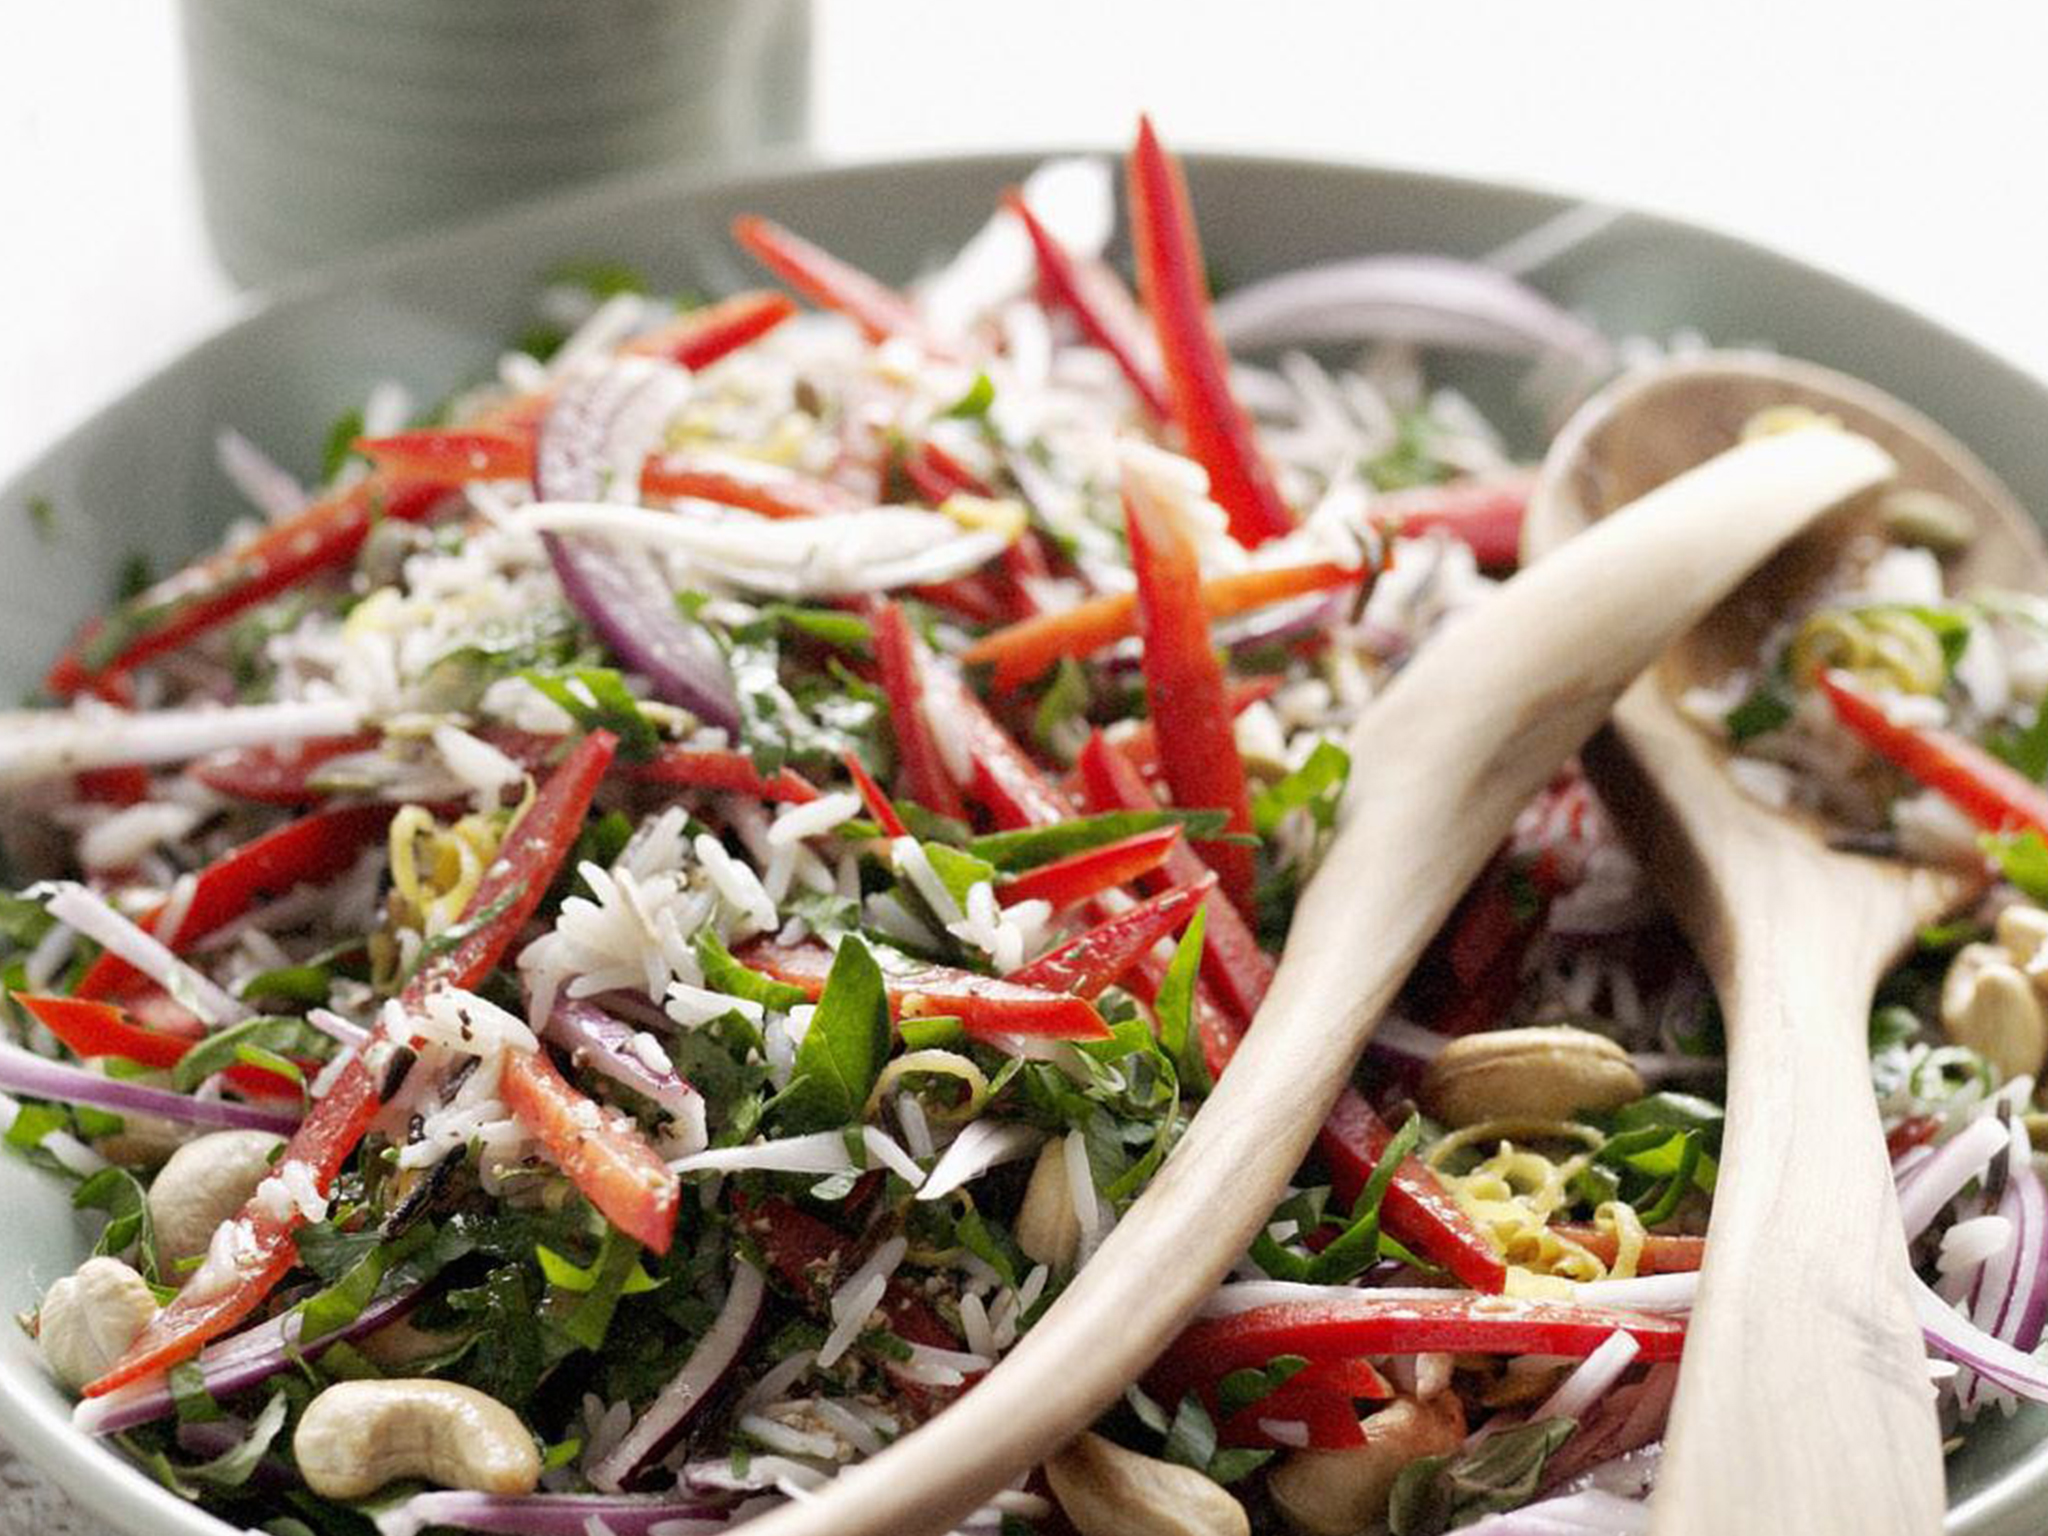 crunchy rice and herb salad